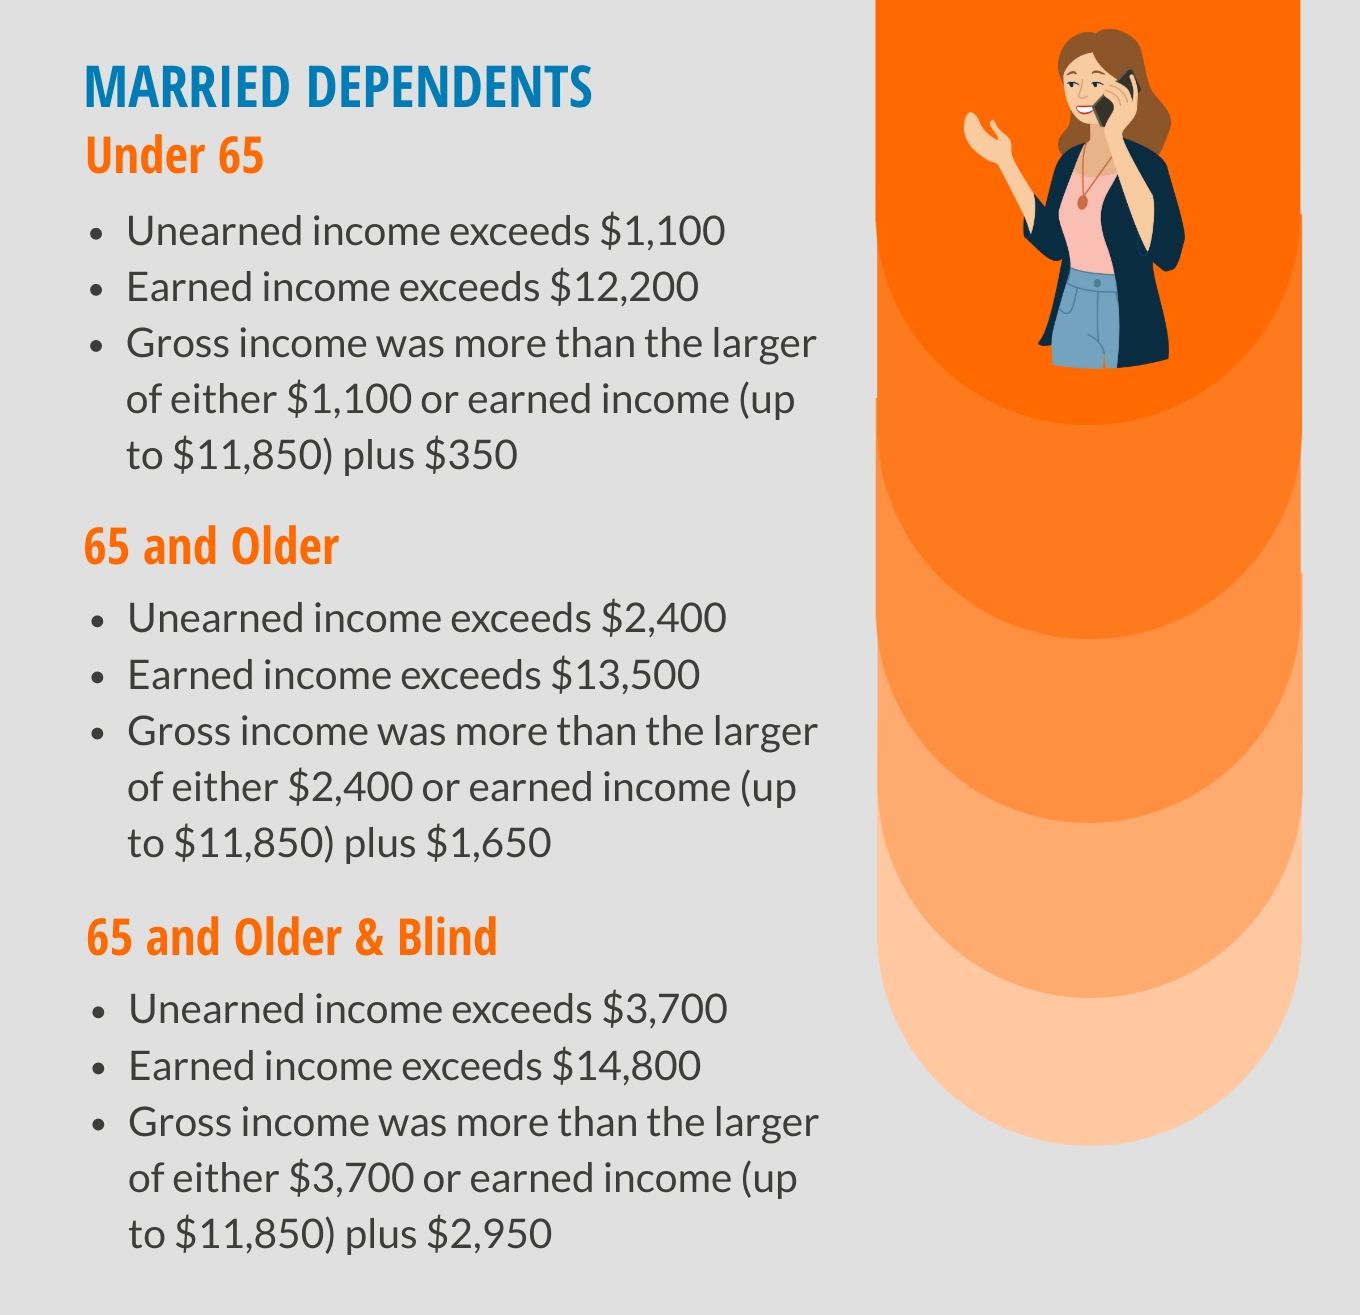 tax filing requirements for married dependents